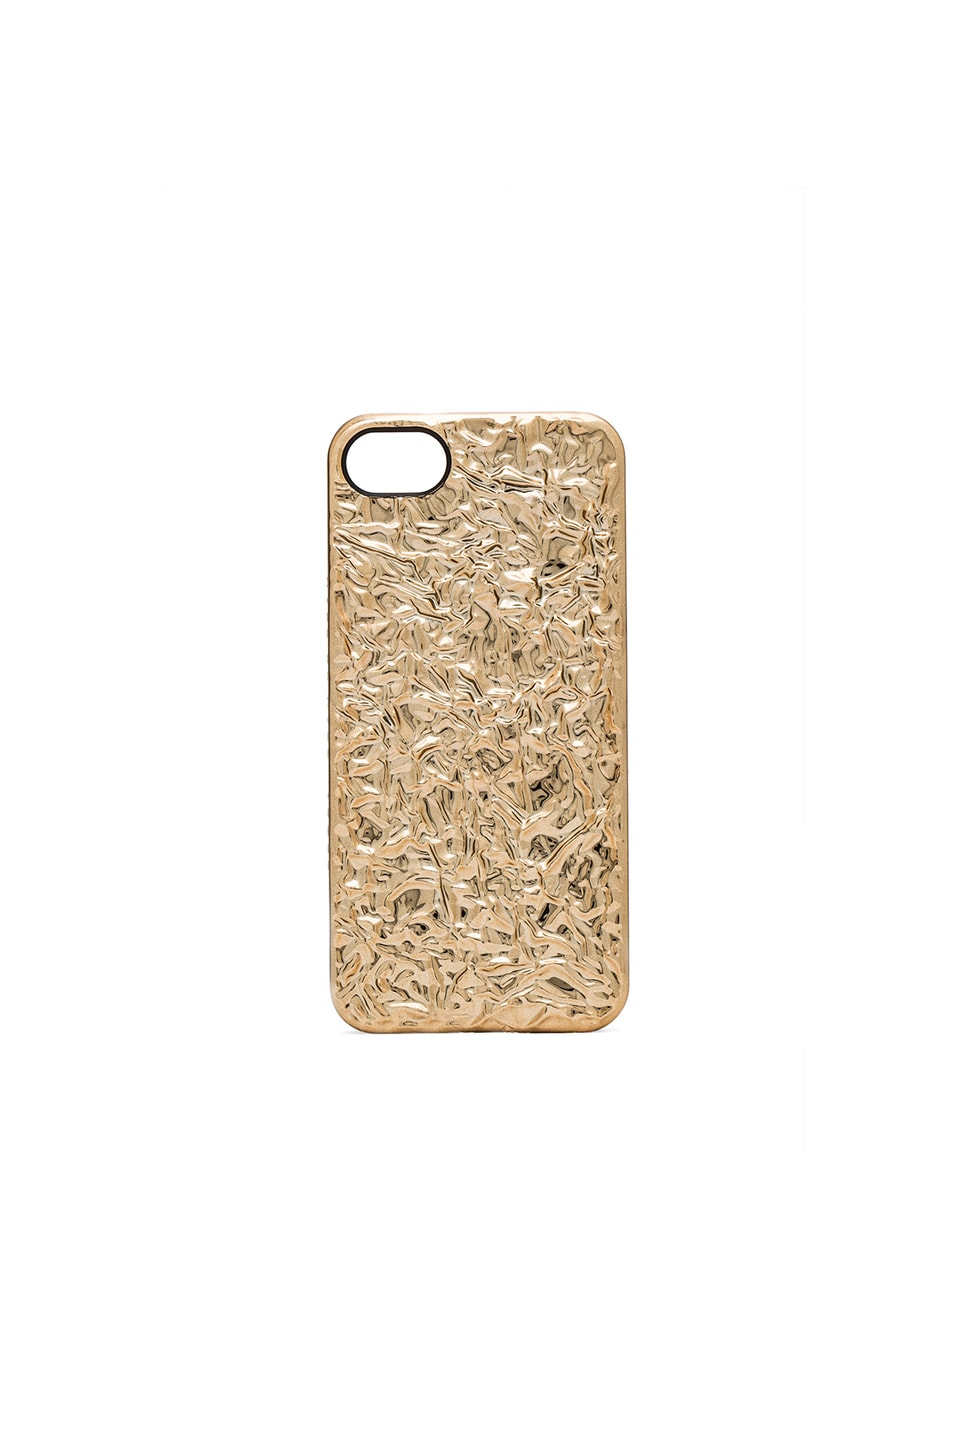 Marc by Marc Jacobs Foil iPhone 5 Case in Rose Gold